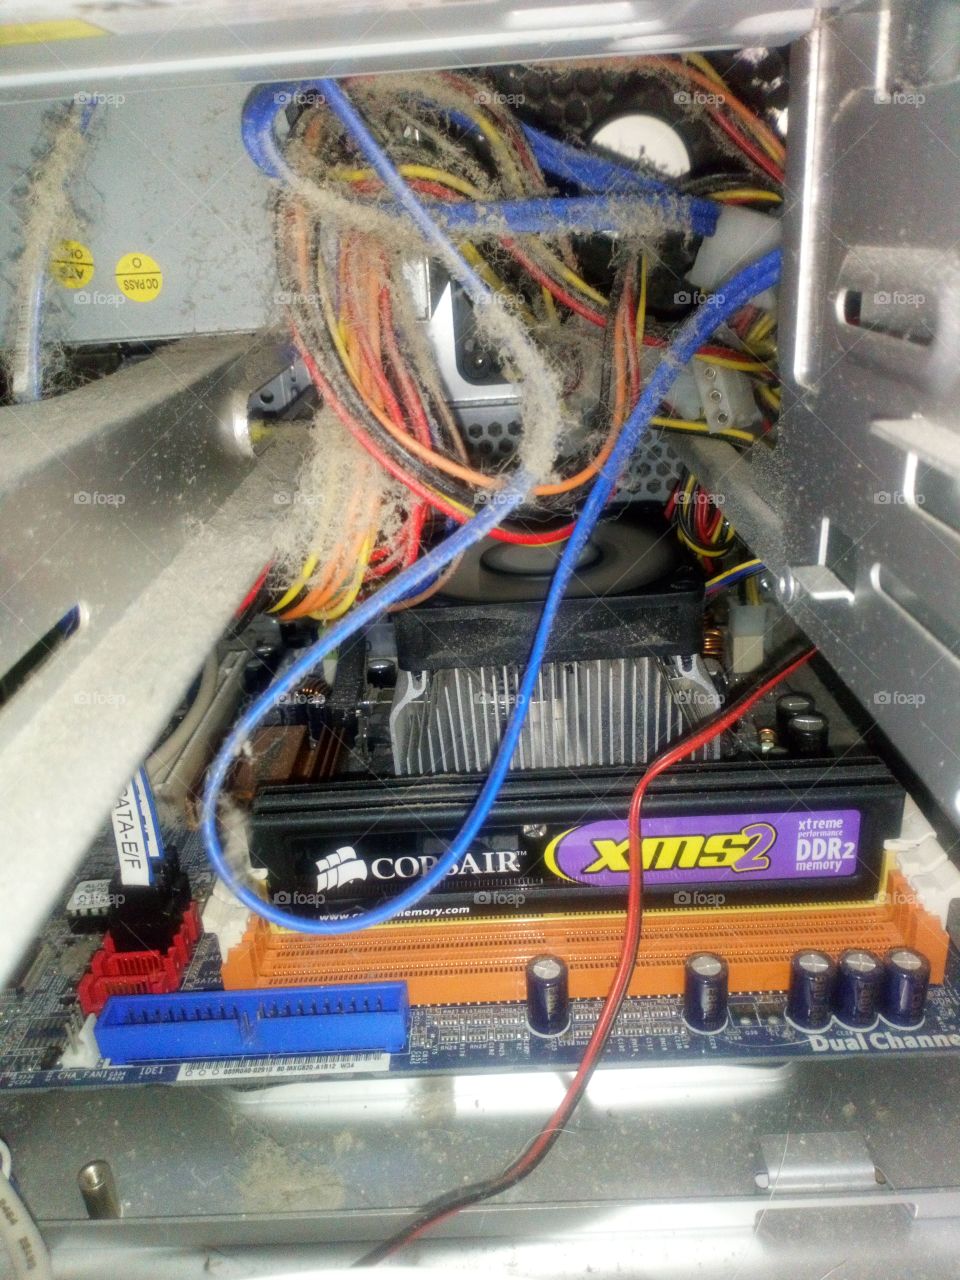 very dirty old PC